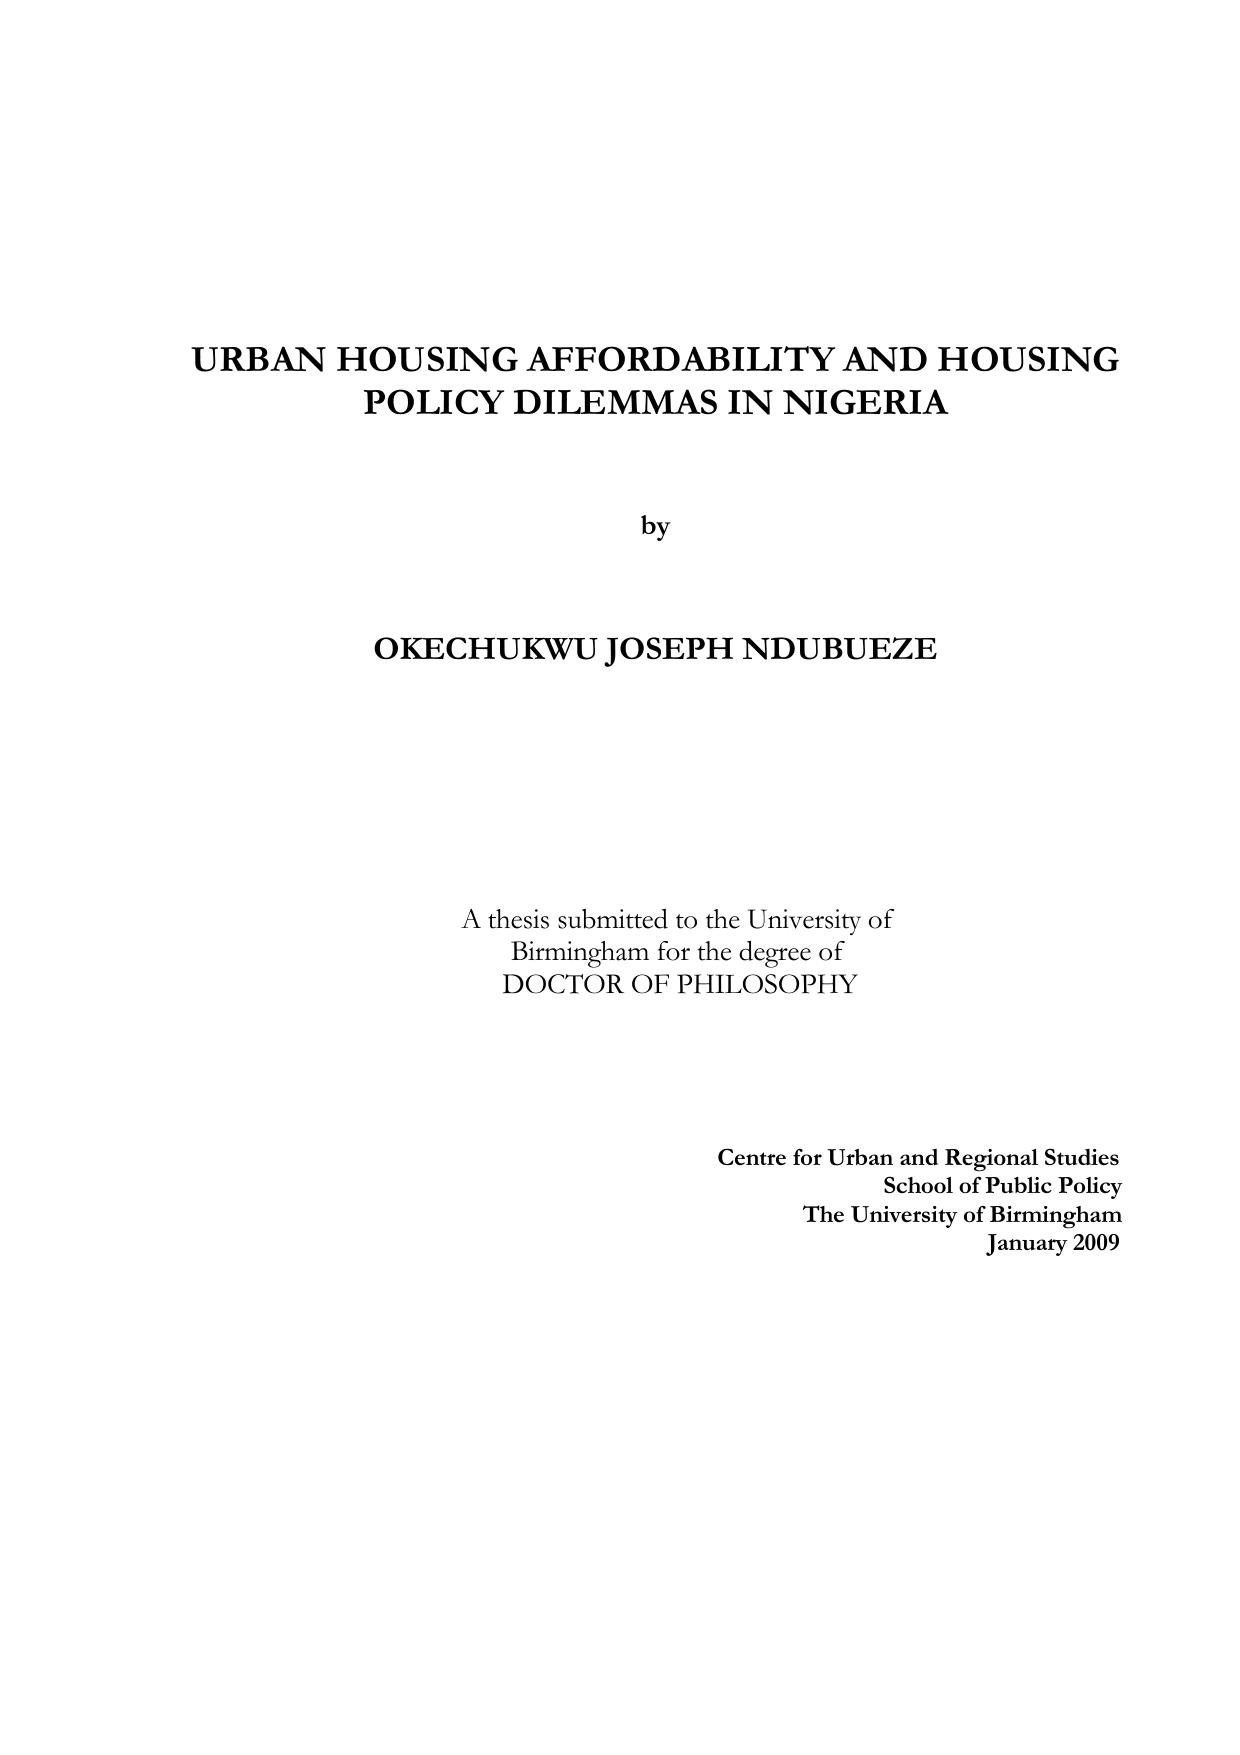 Urban housing affordability and housing policy dilemmas in Nigeria